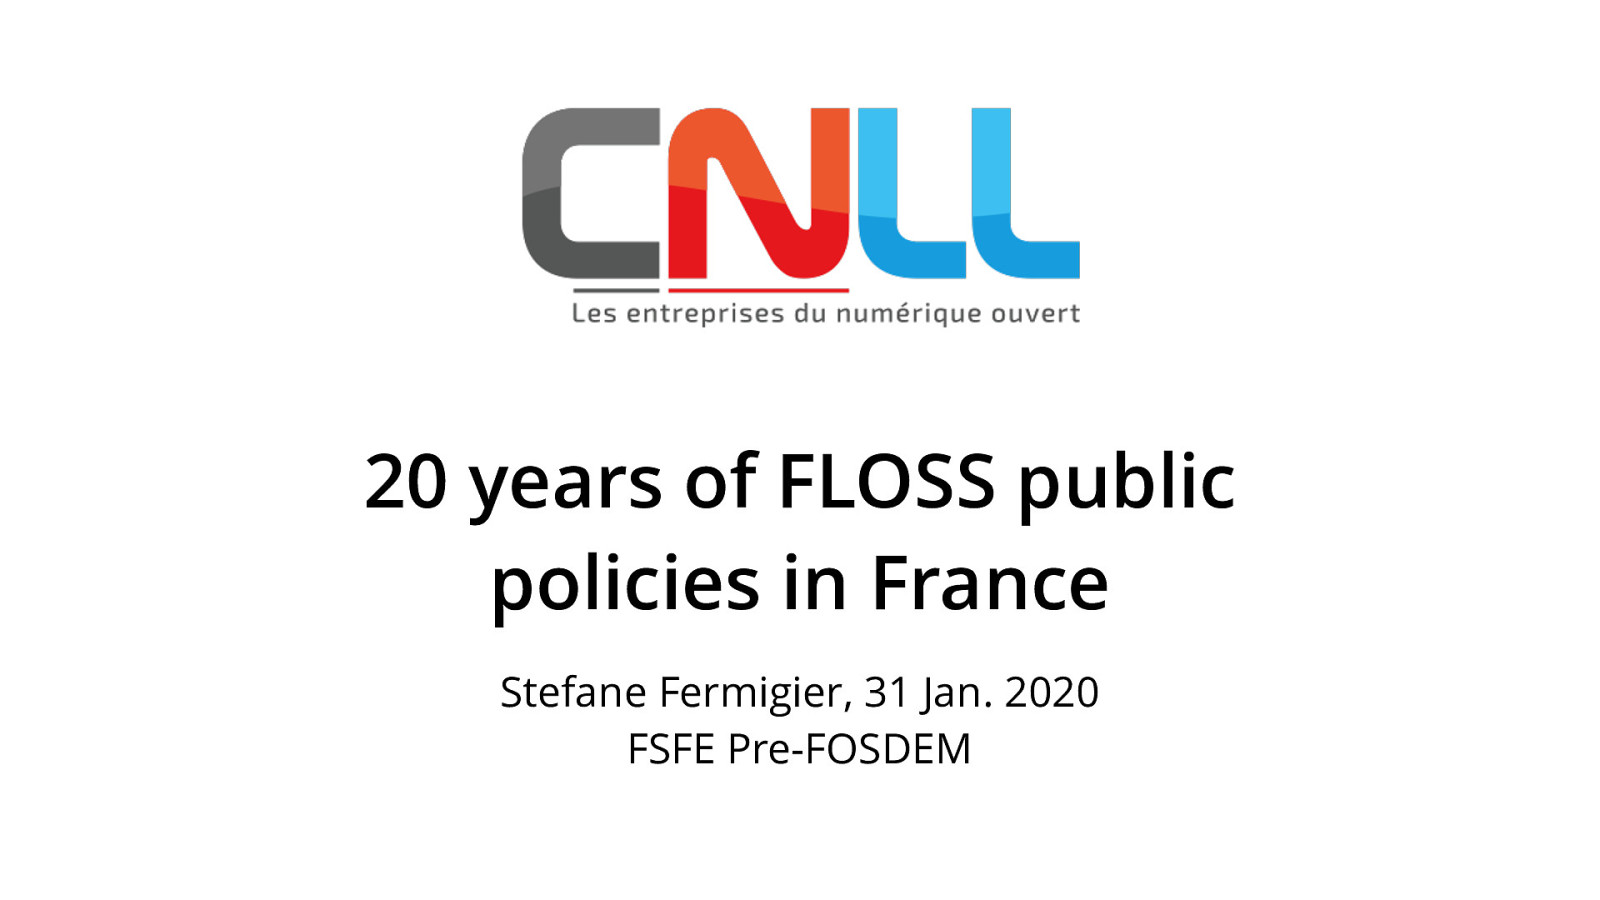 20 years of FLOSS public policies in France (Pre-FOSDEM 2020 edition)